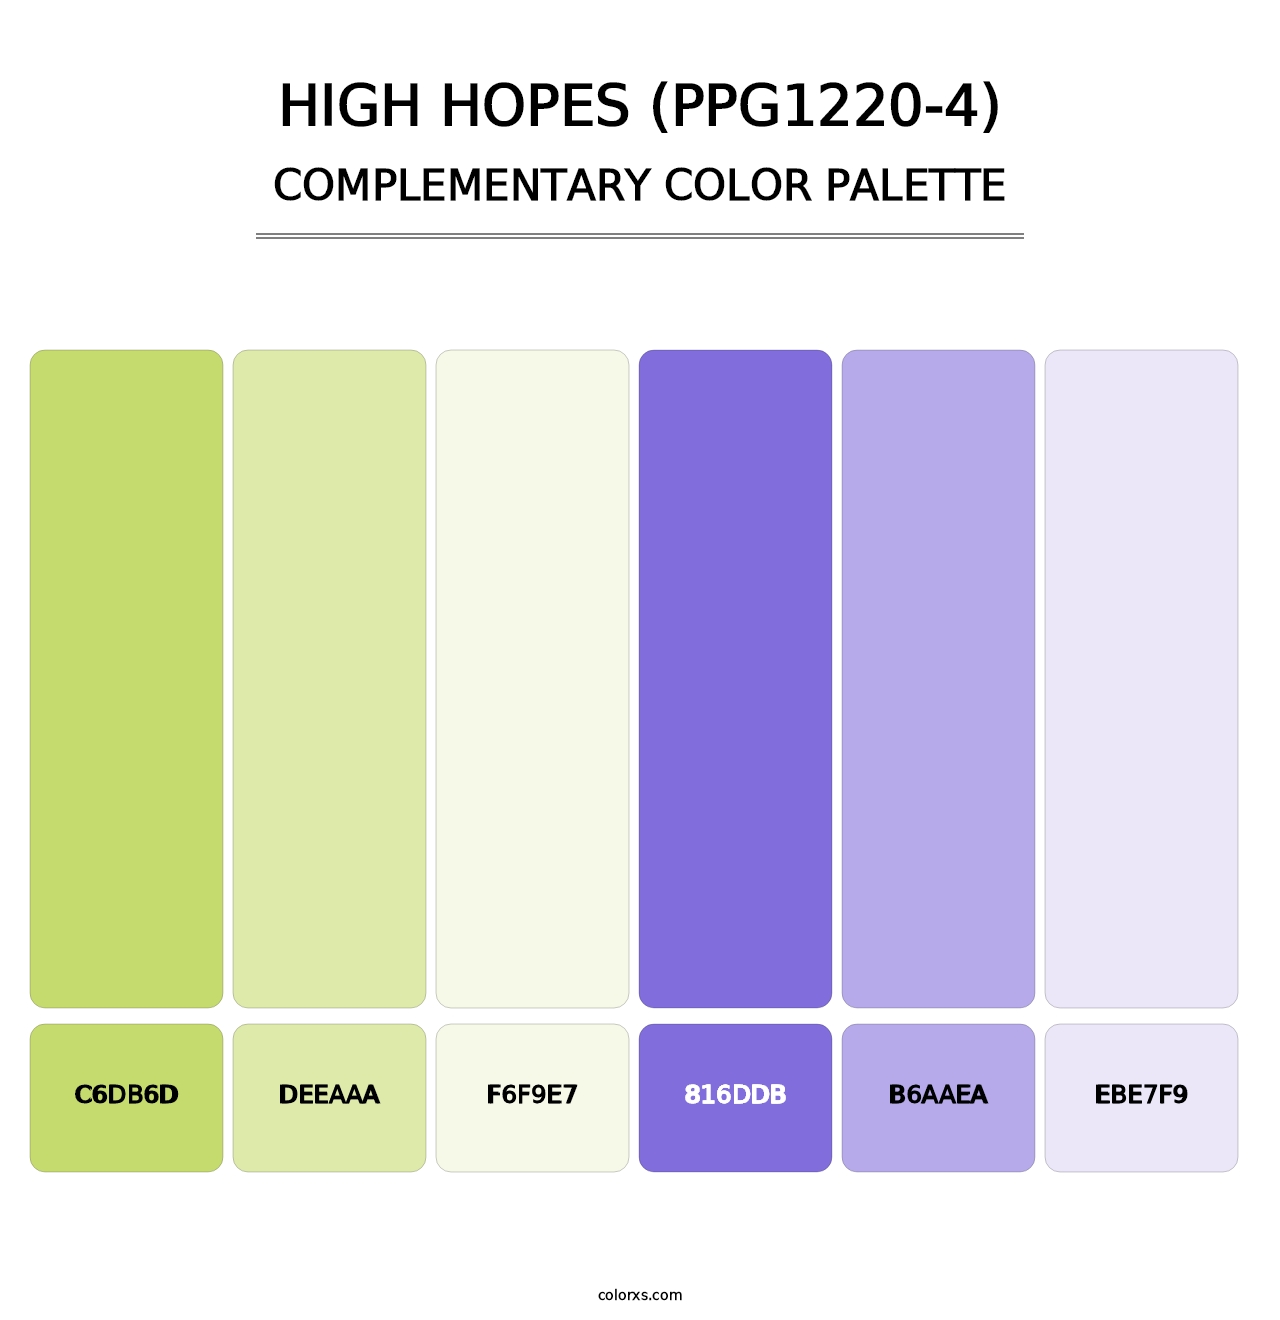 High Hopes (PPG1220-4) - Complementary Color Palette